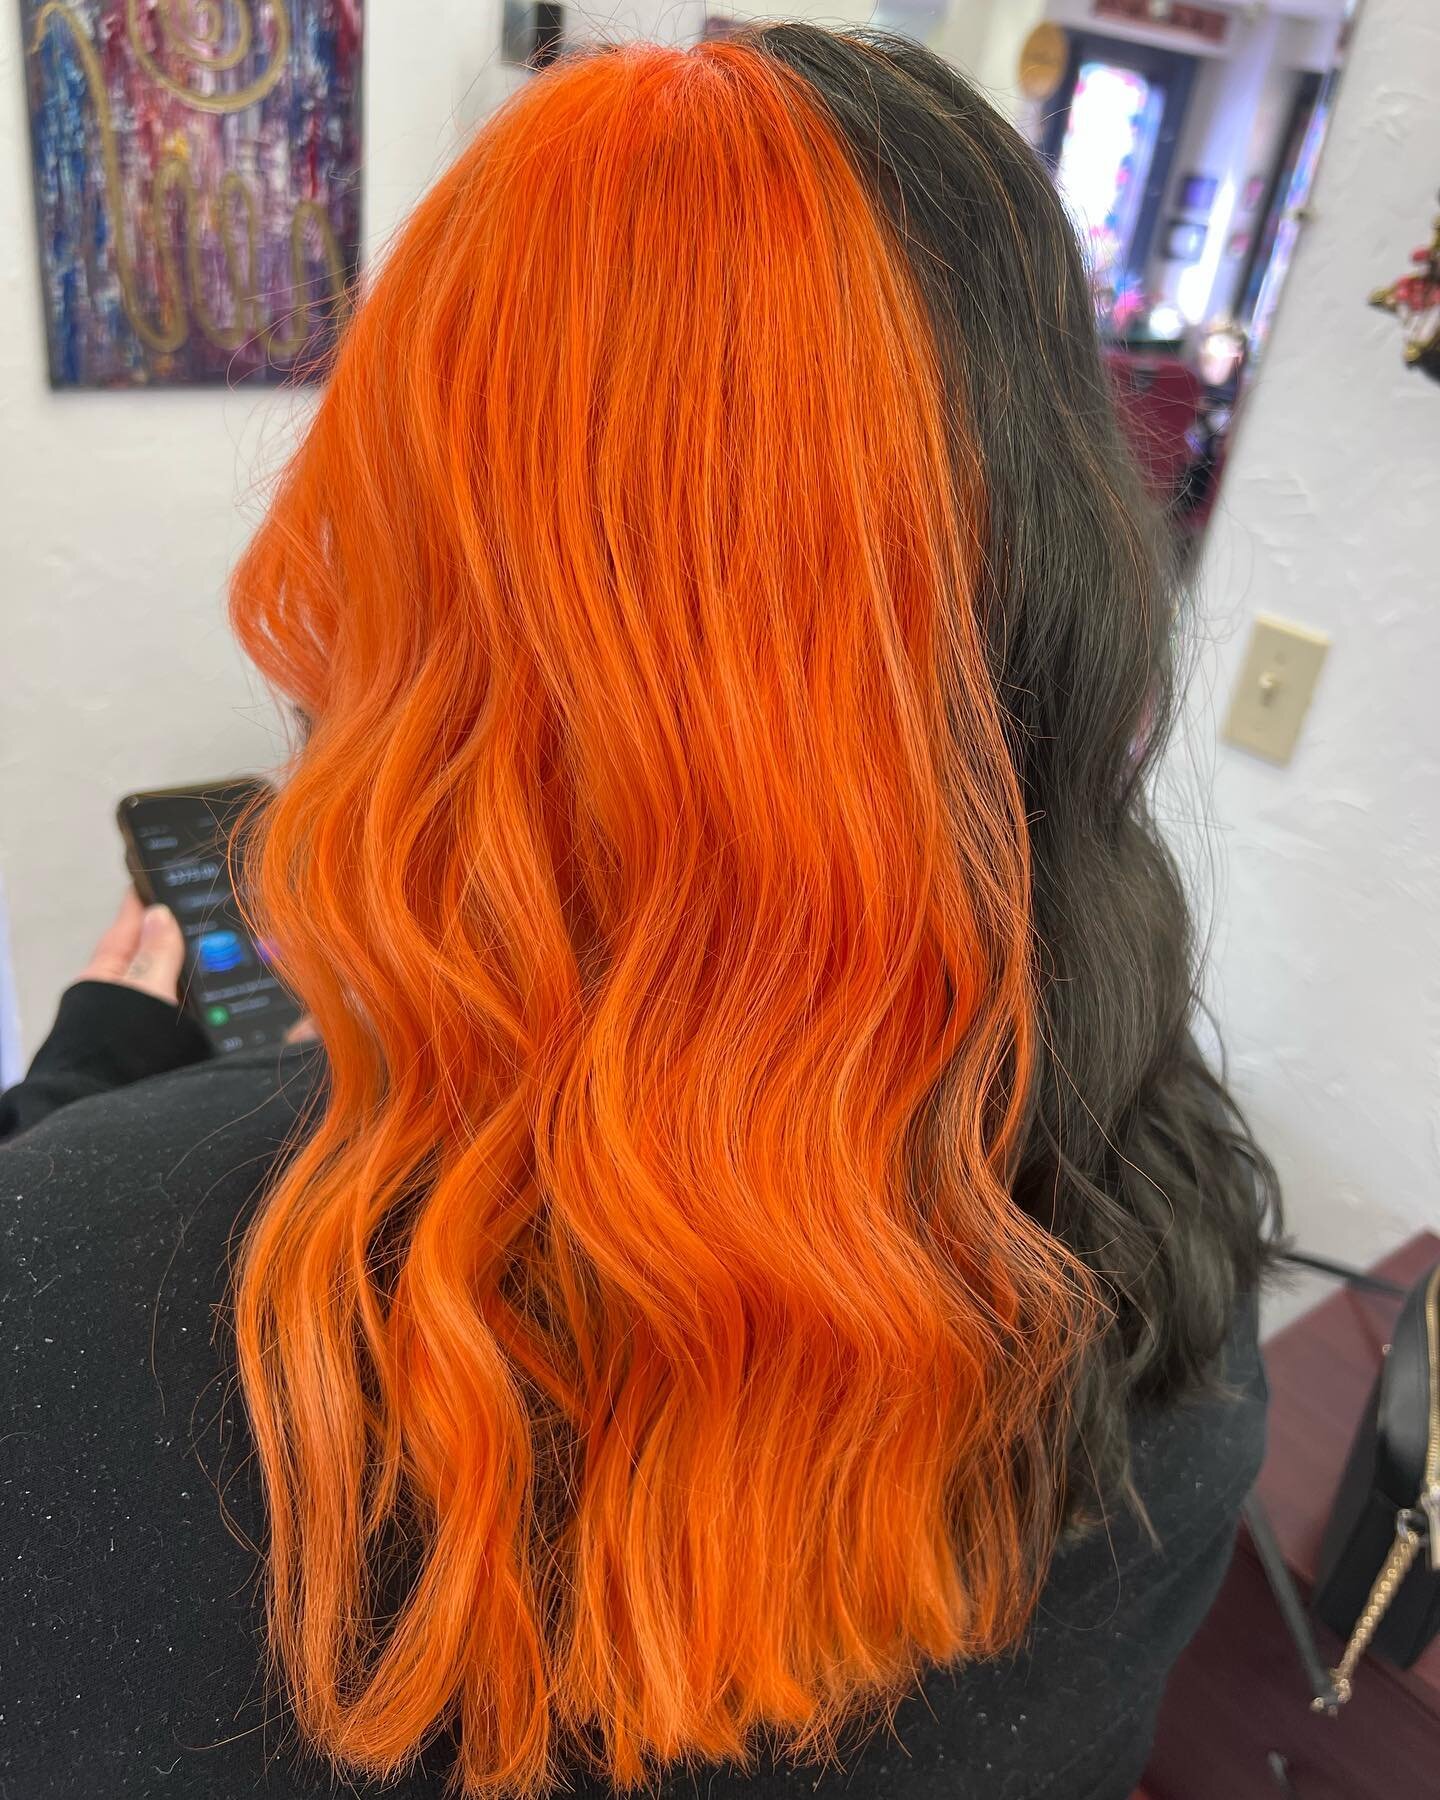 Take a minute to appreciate some of @kianaleehairco beautiful work!! She is currently taking appointments rights now! Shoot us a message and we will get you scheduled ASAP! #evansvillehair #eisforeveryone #salon #hairstyles #electricowl